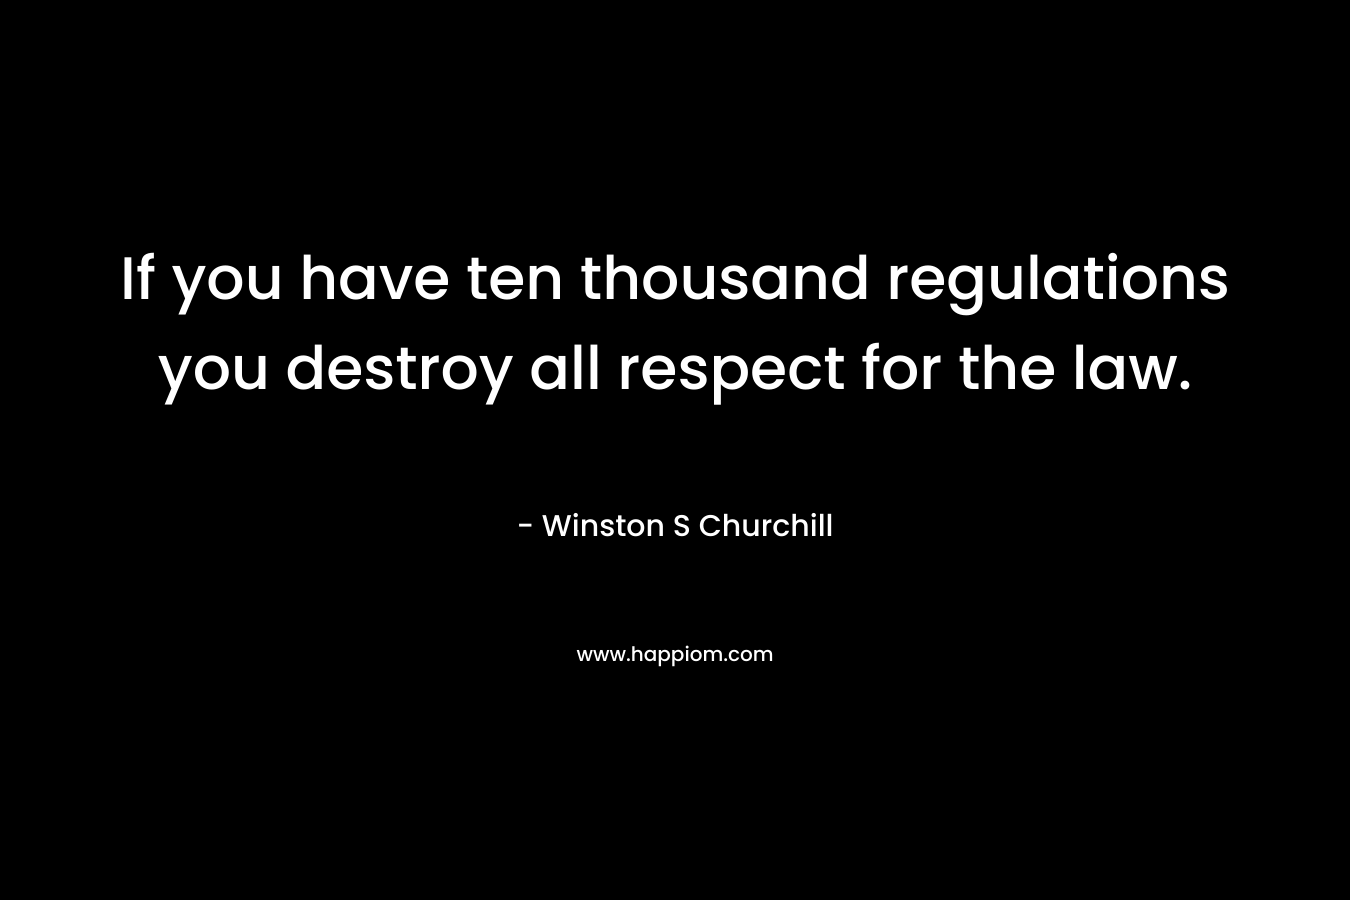 If you have ten thousand regulations you destroy all respect for the law.